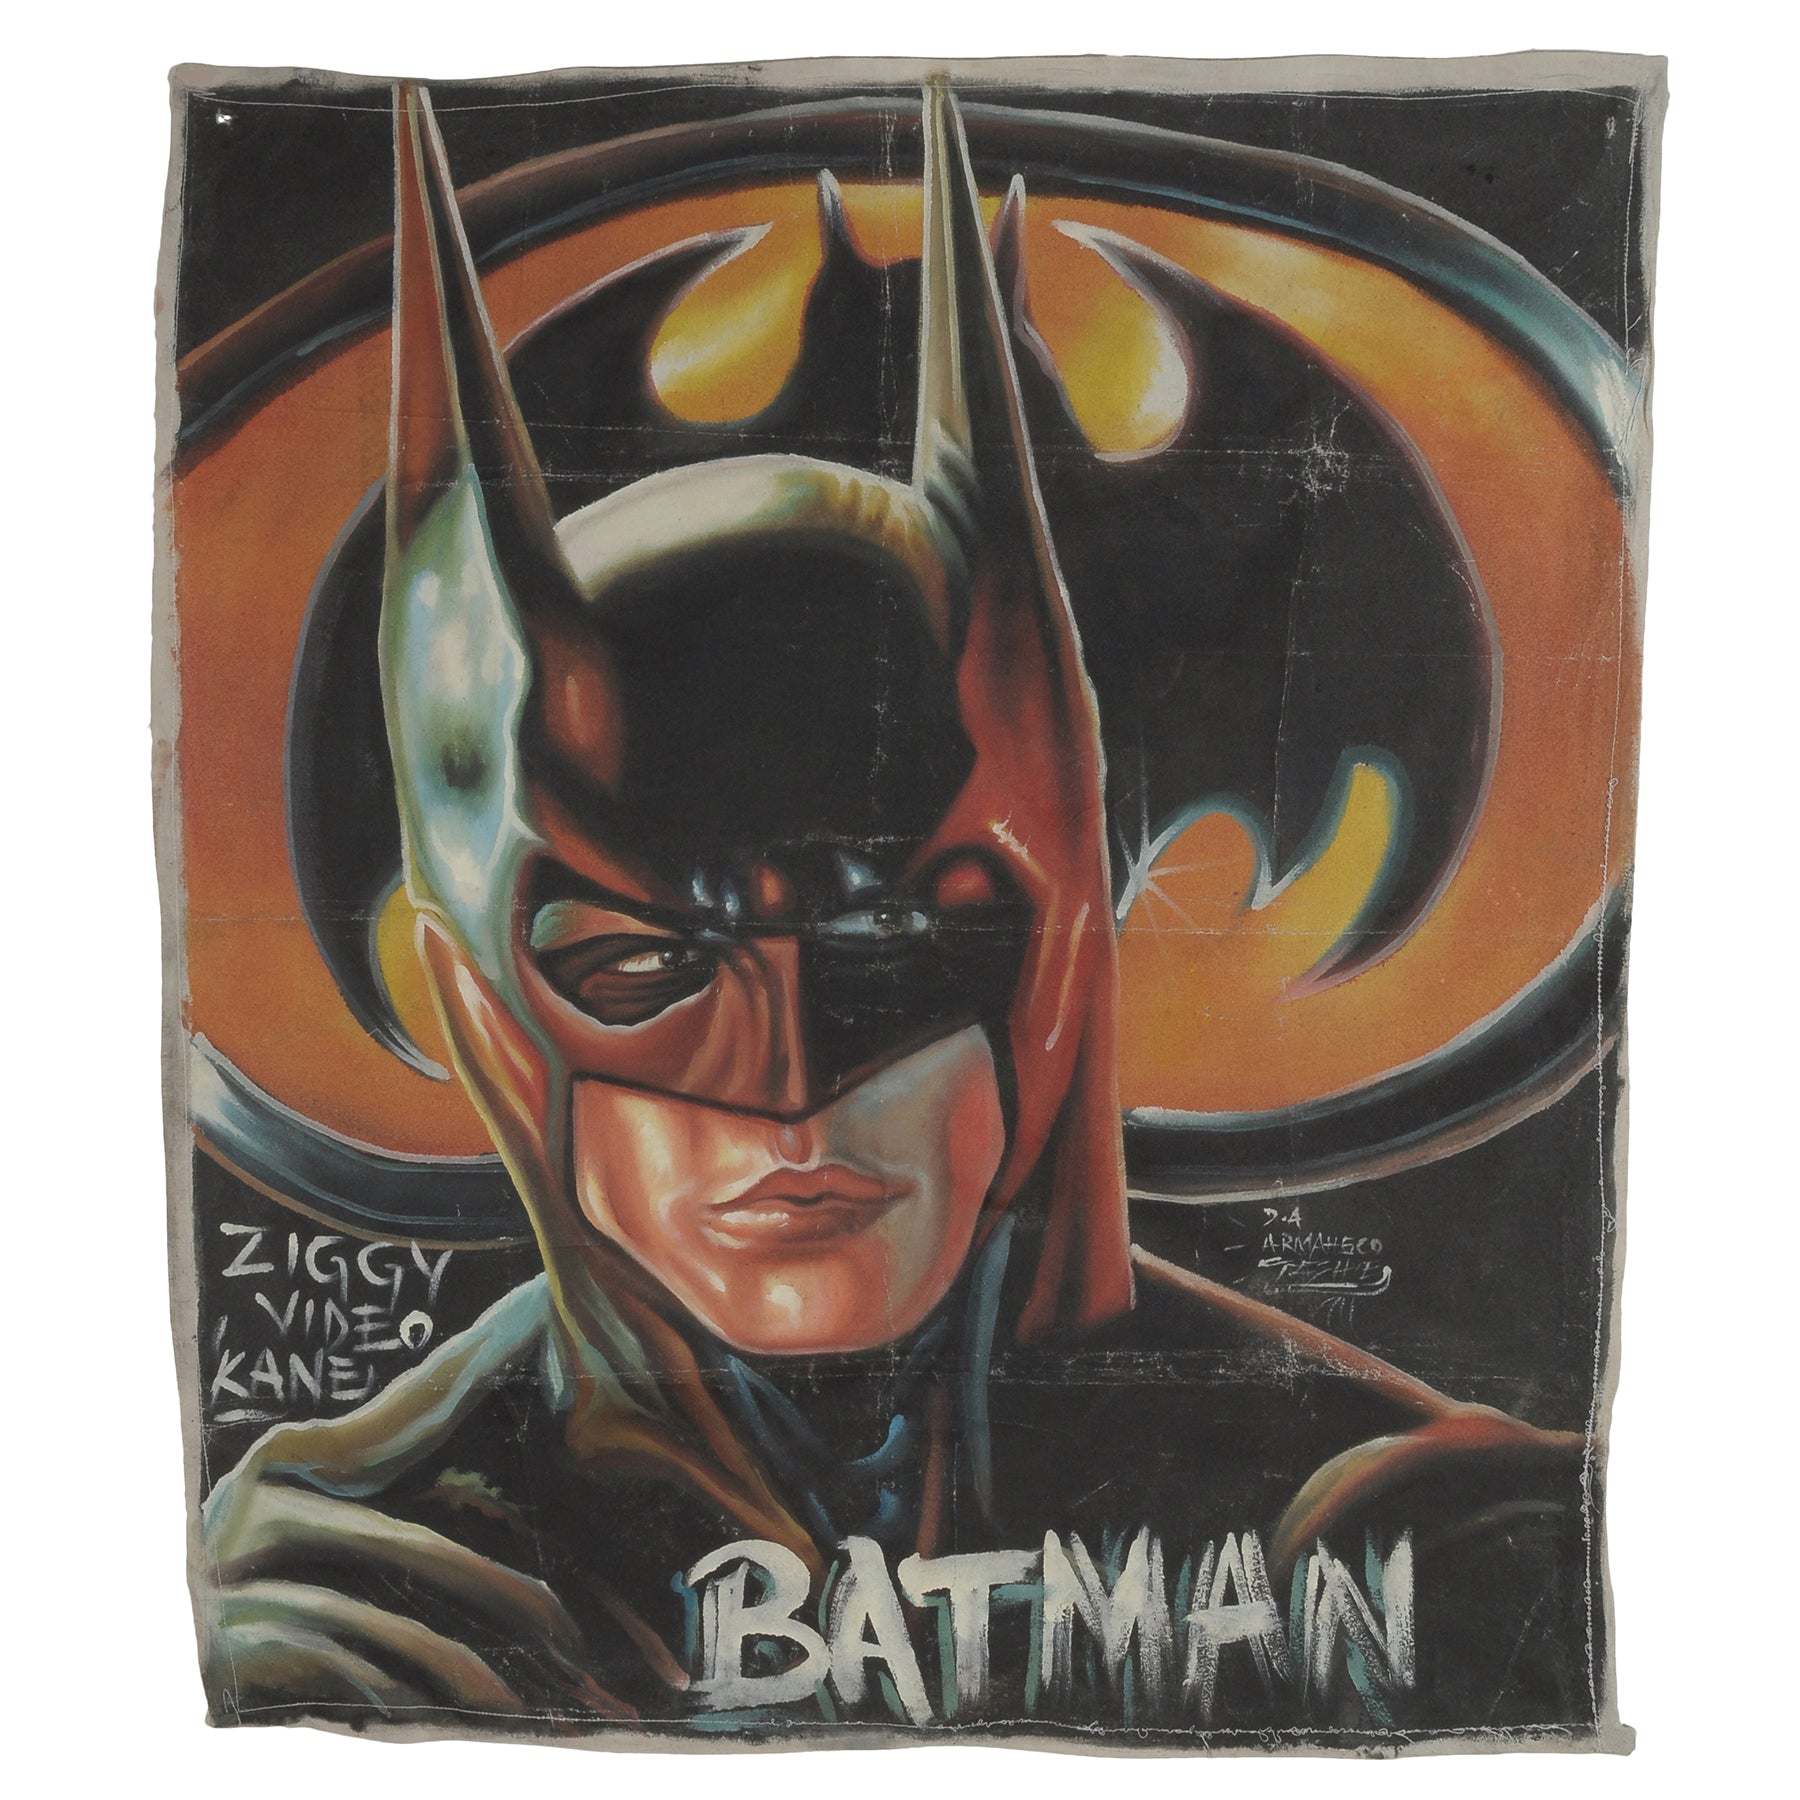 Batman movie poster 1989 hand painted in Ghana for the local cinemas